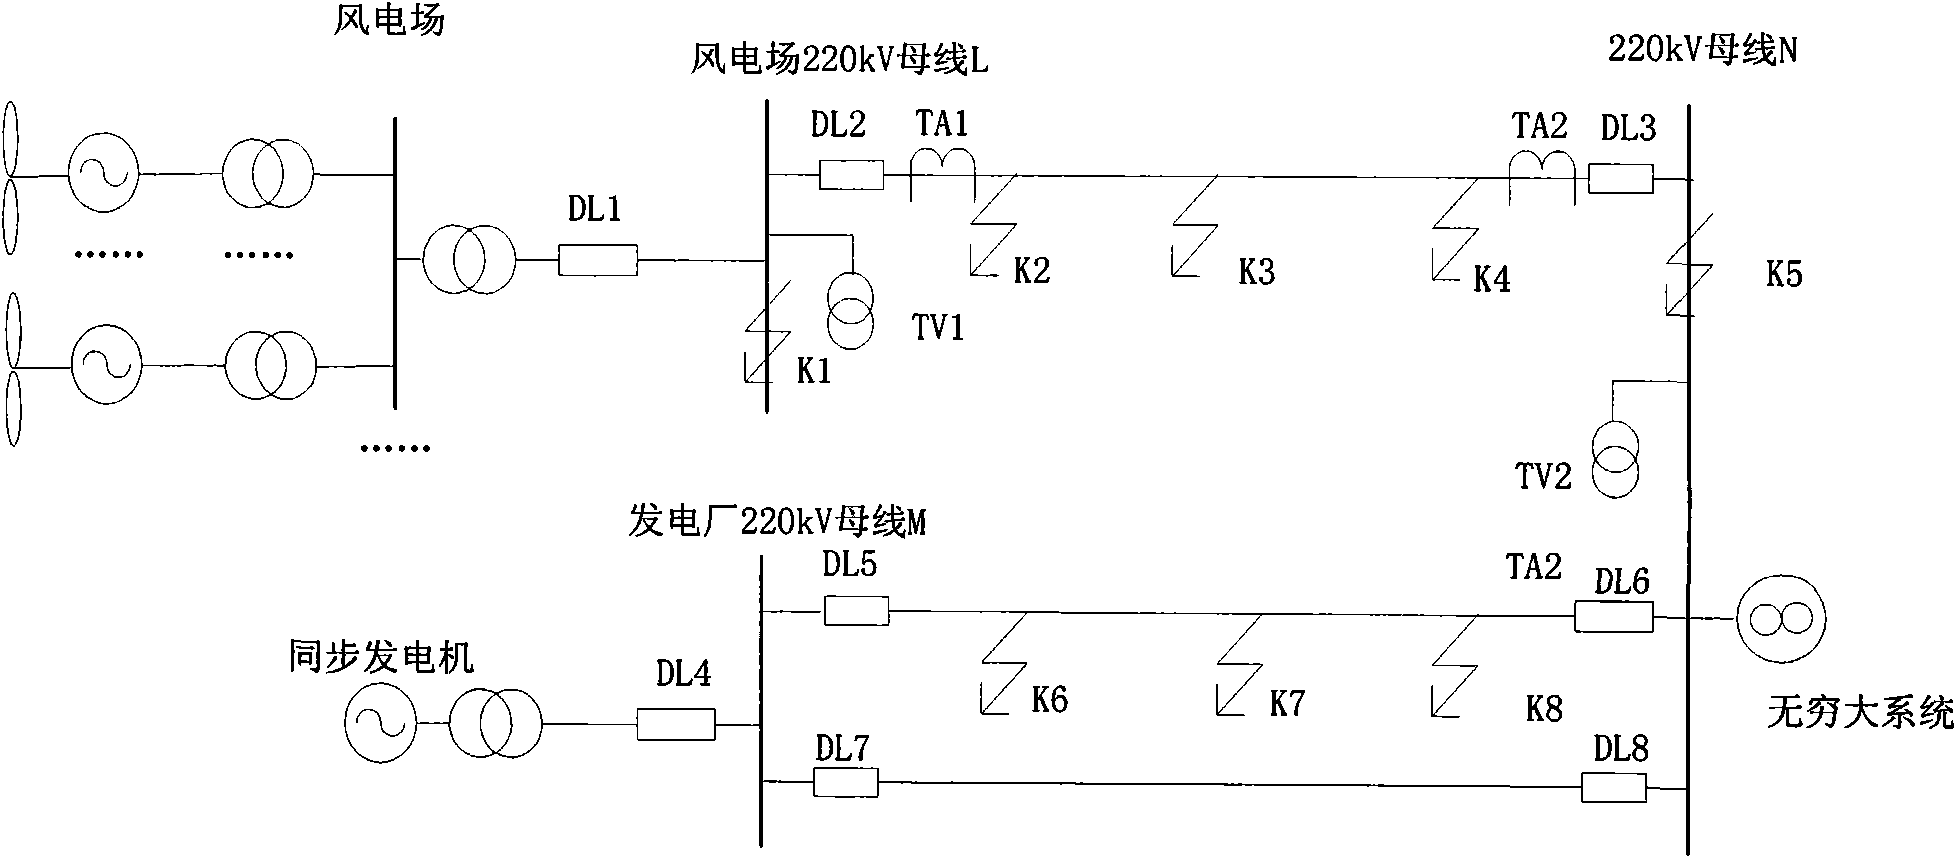 Operation method for safely applying line protection device to wind power station